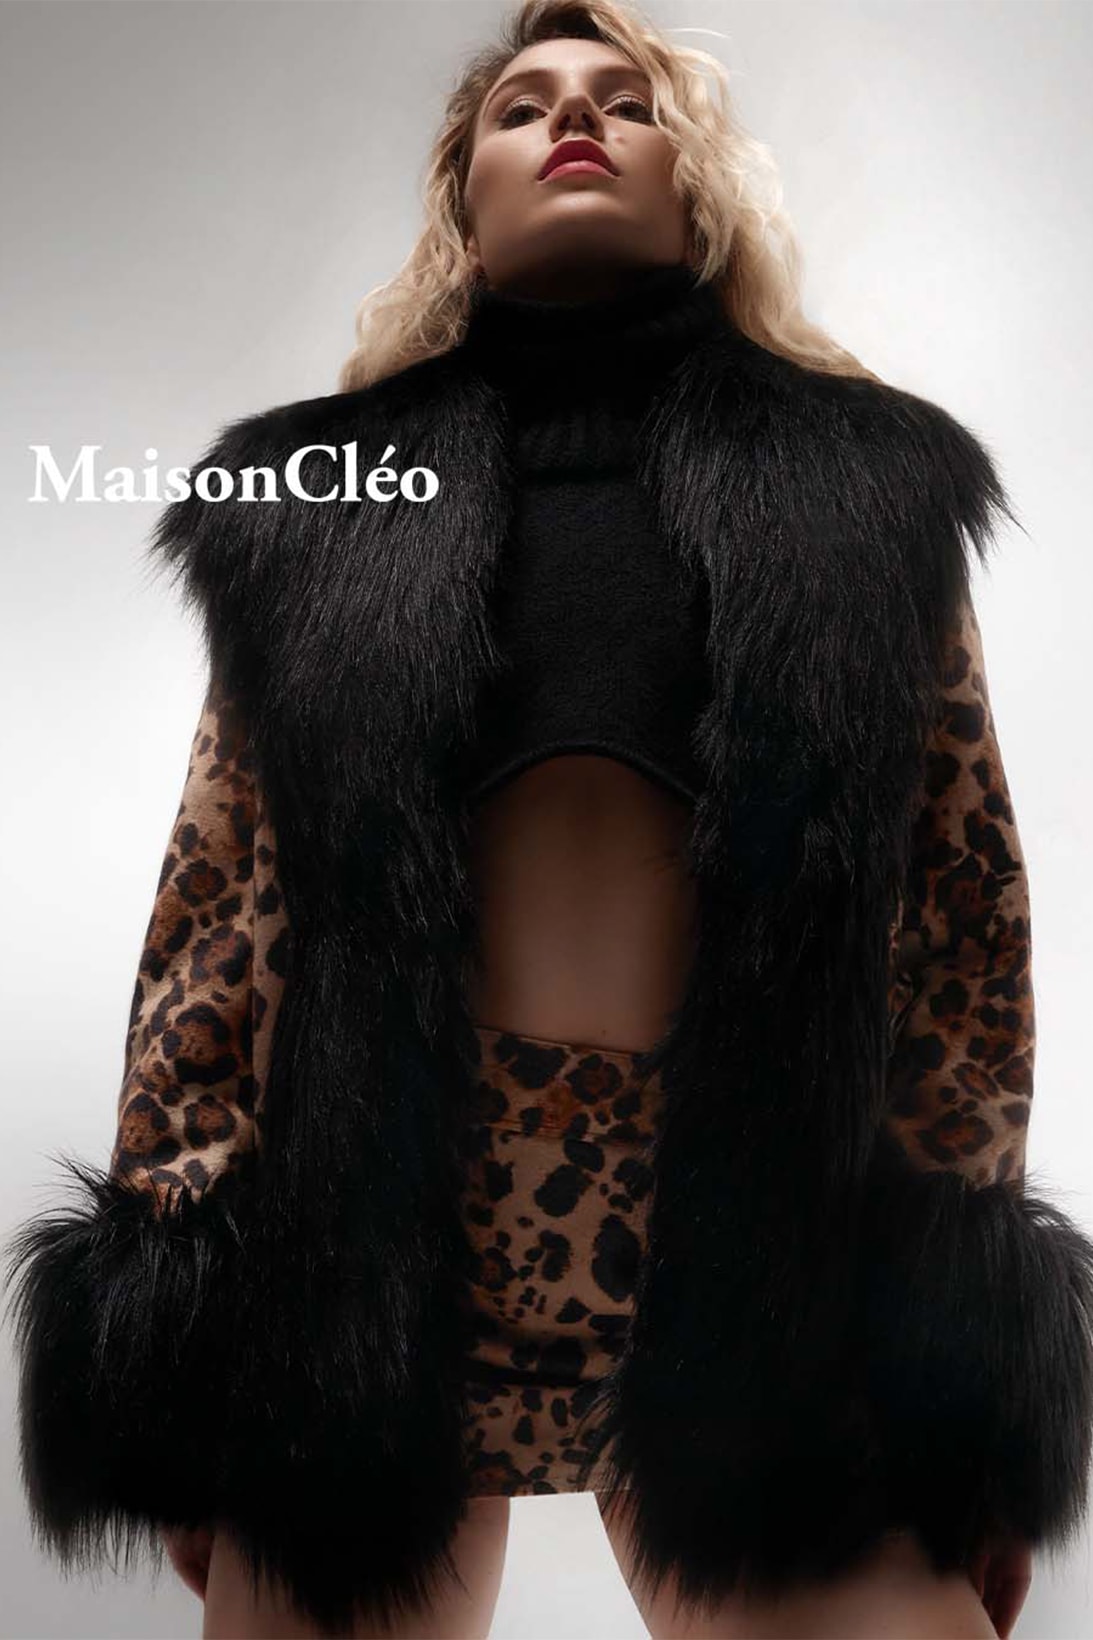 MaisonCleo Official Photos Affordable Outerwear Sustainability Marie Dewet Leopard Print